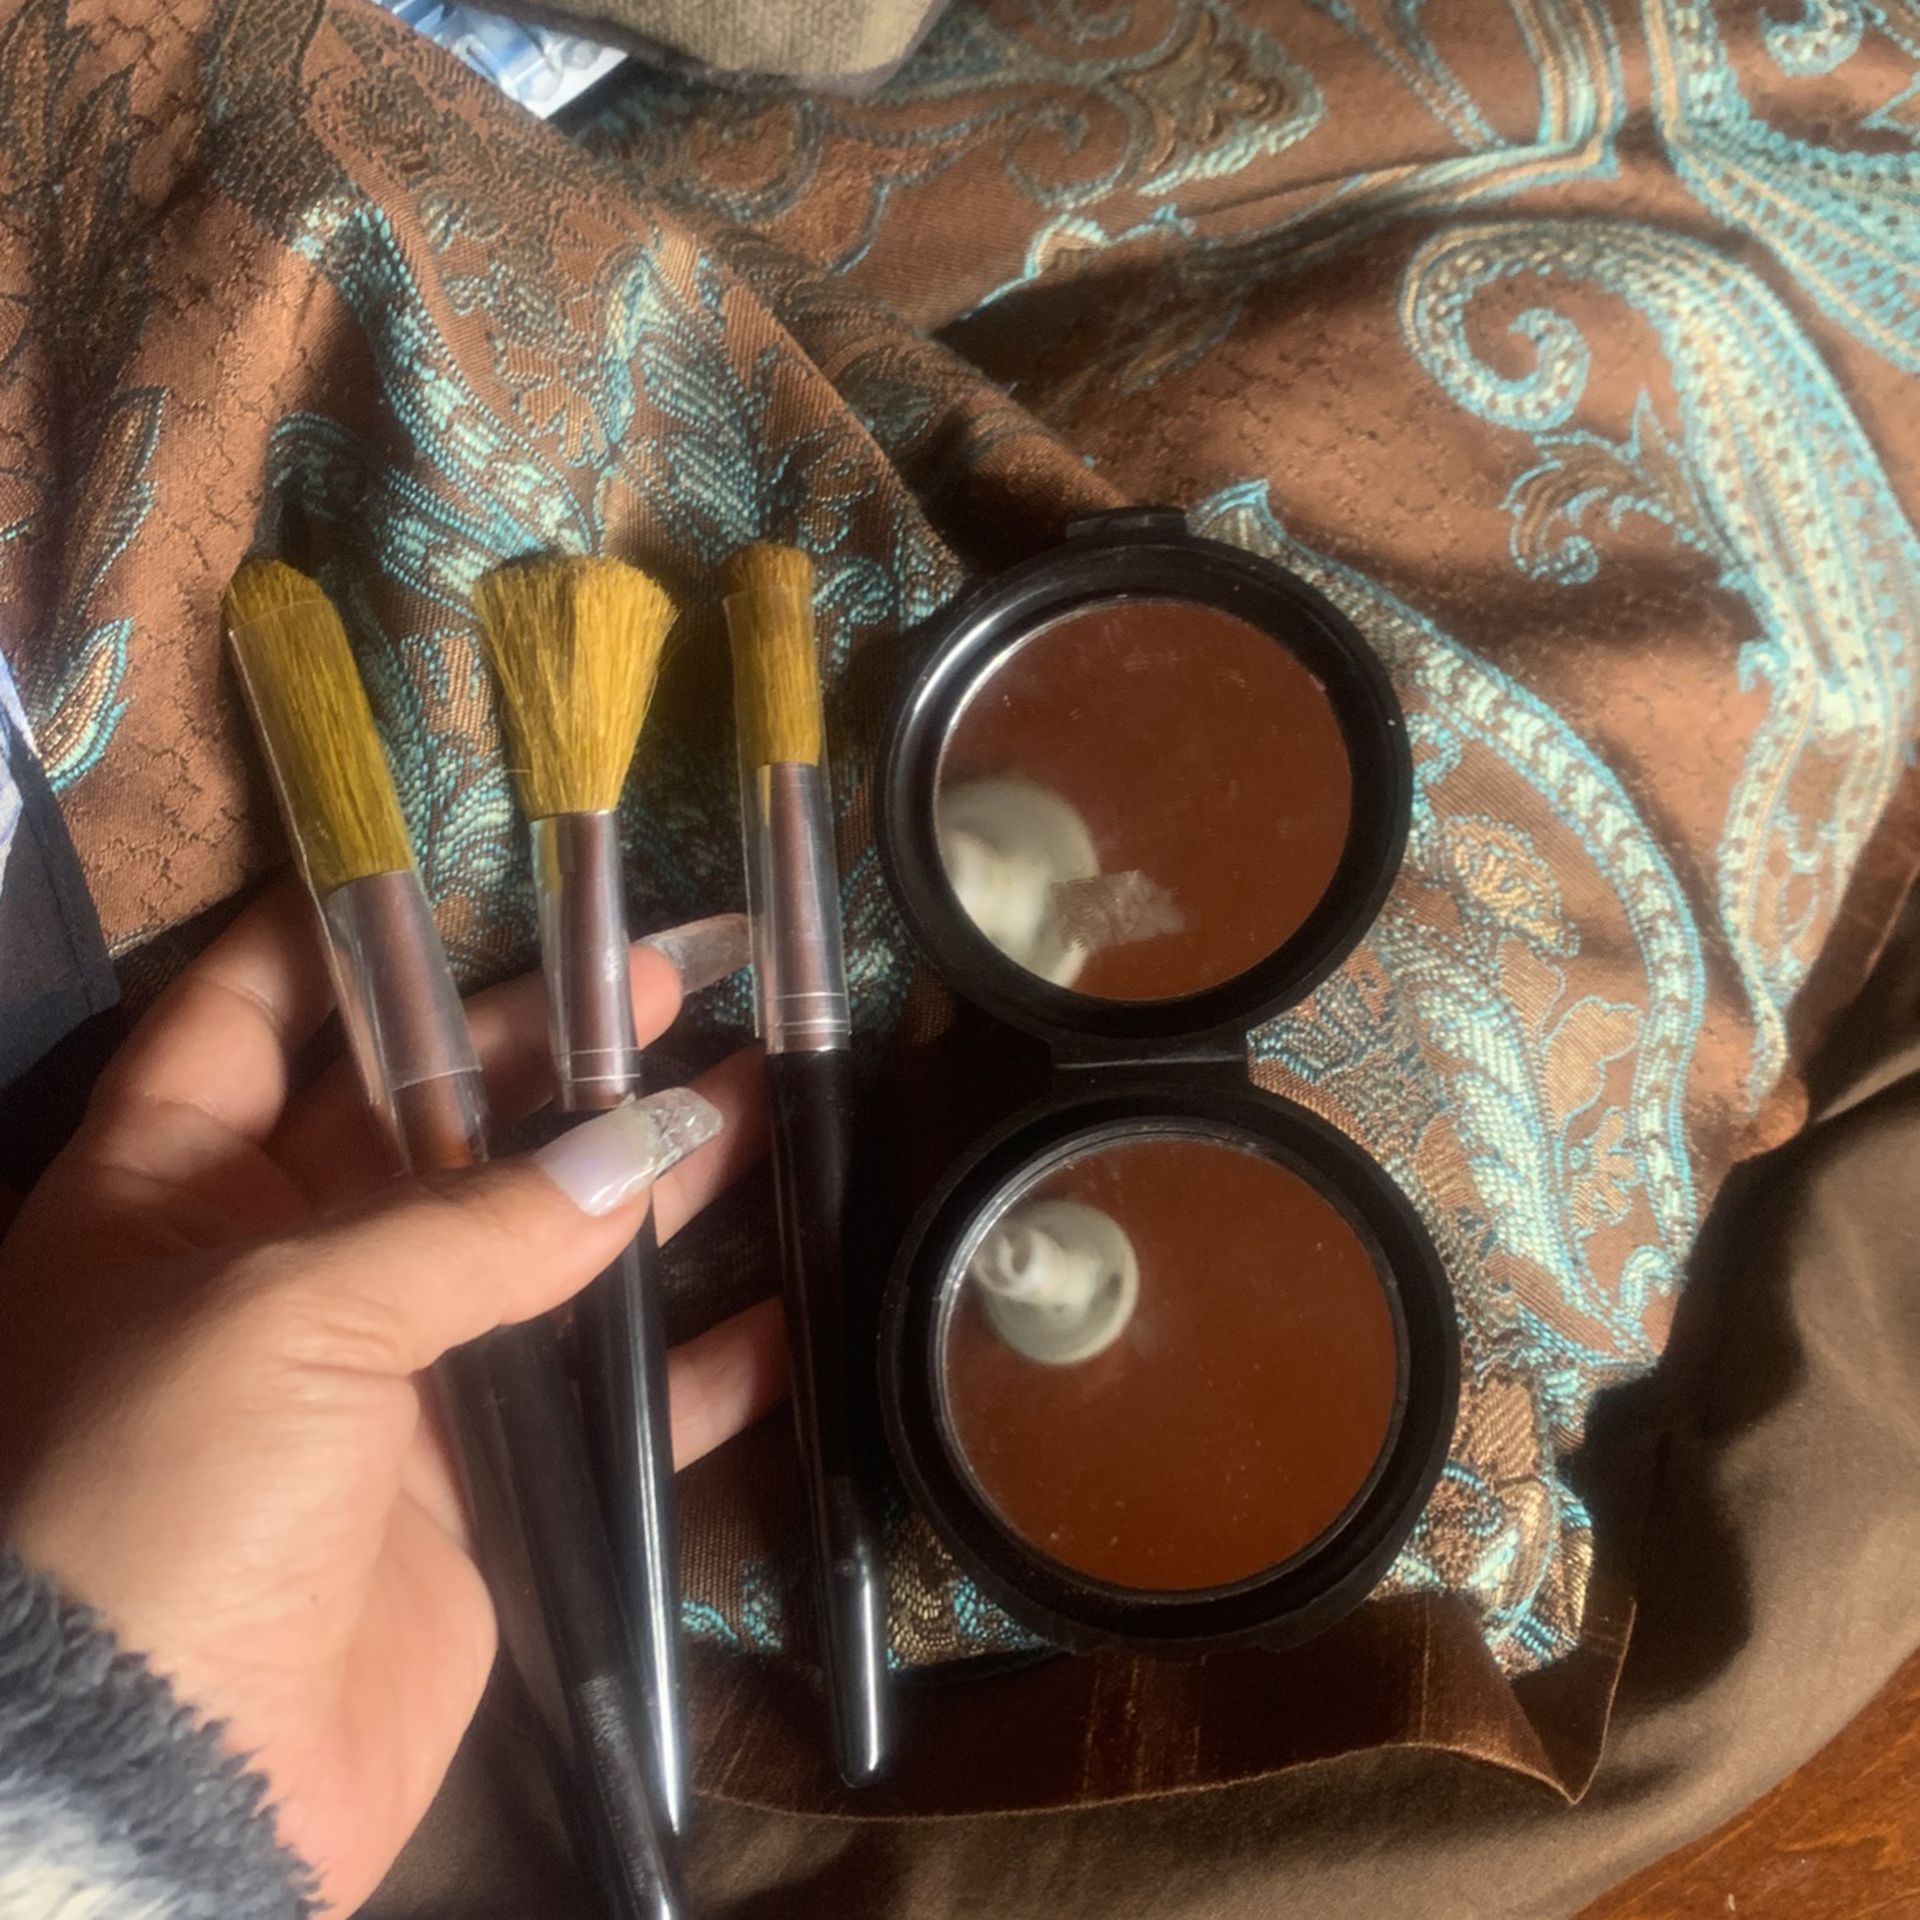 6pic Set makeup Brushes With Compact Mirror 